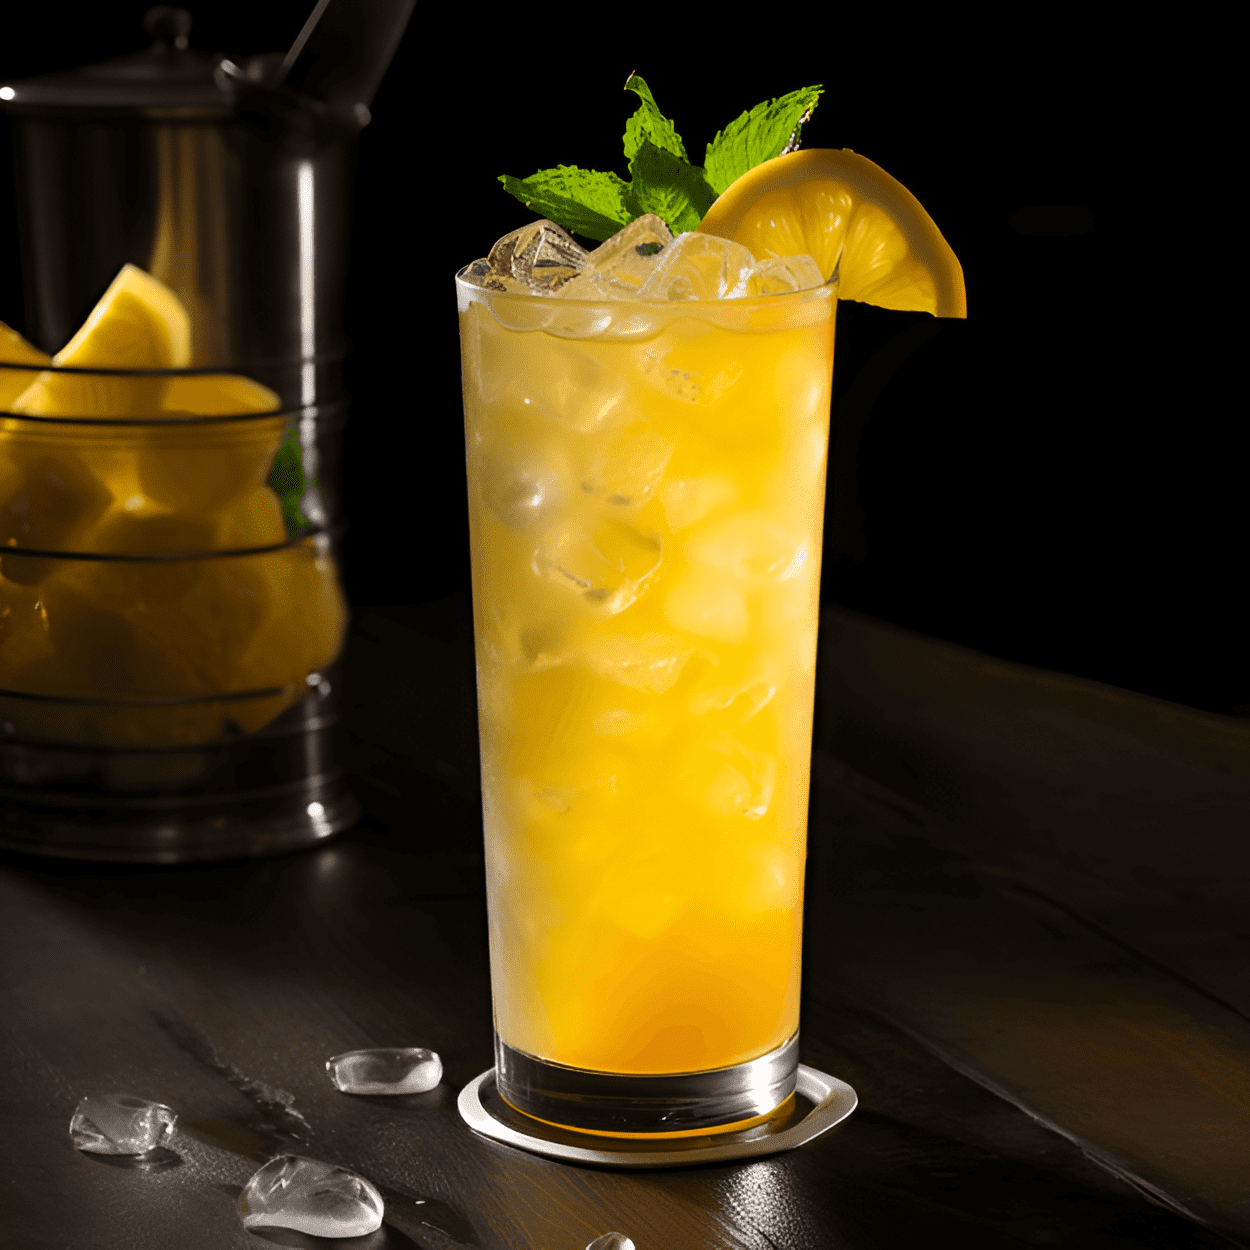 Blonde Joke Cocktail Recipe - The Blonde Joke cocktail is a sweet and fruity drink with a citrusy punch. It has a light and refreshing taste, with a hint of tropical flavors. The sweetness of the pineapple and the tartness of the lemon blend perfectly to create a balanced and enjoyable drink.